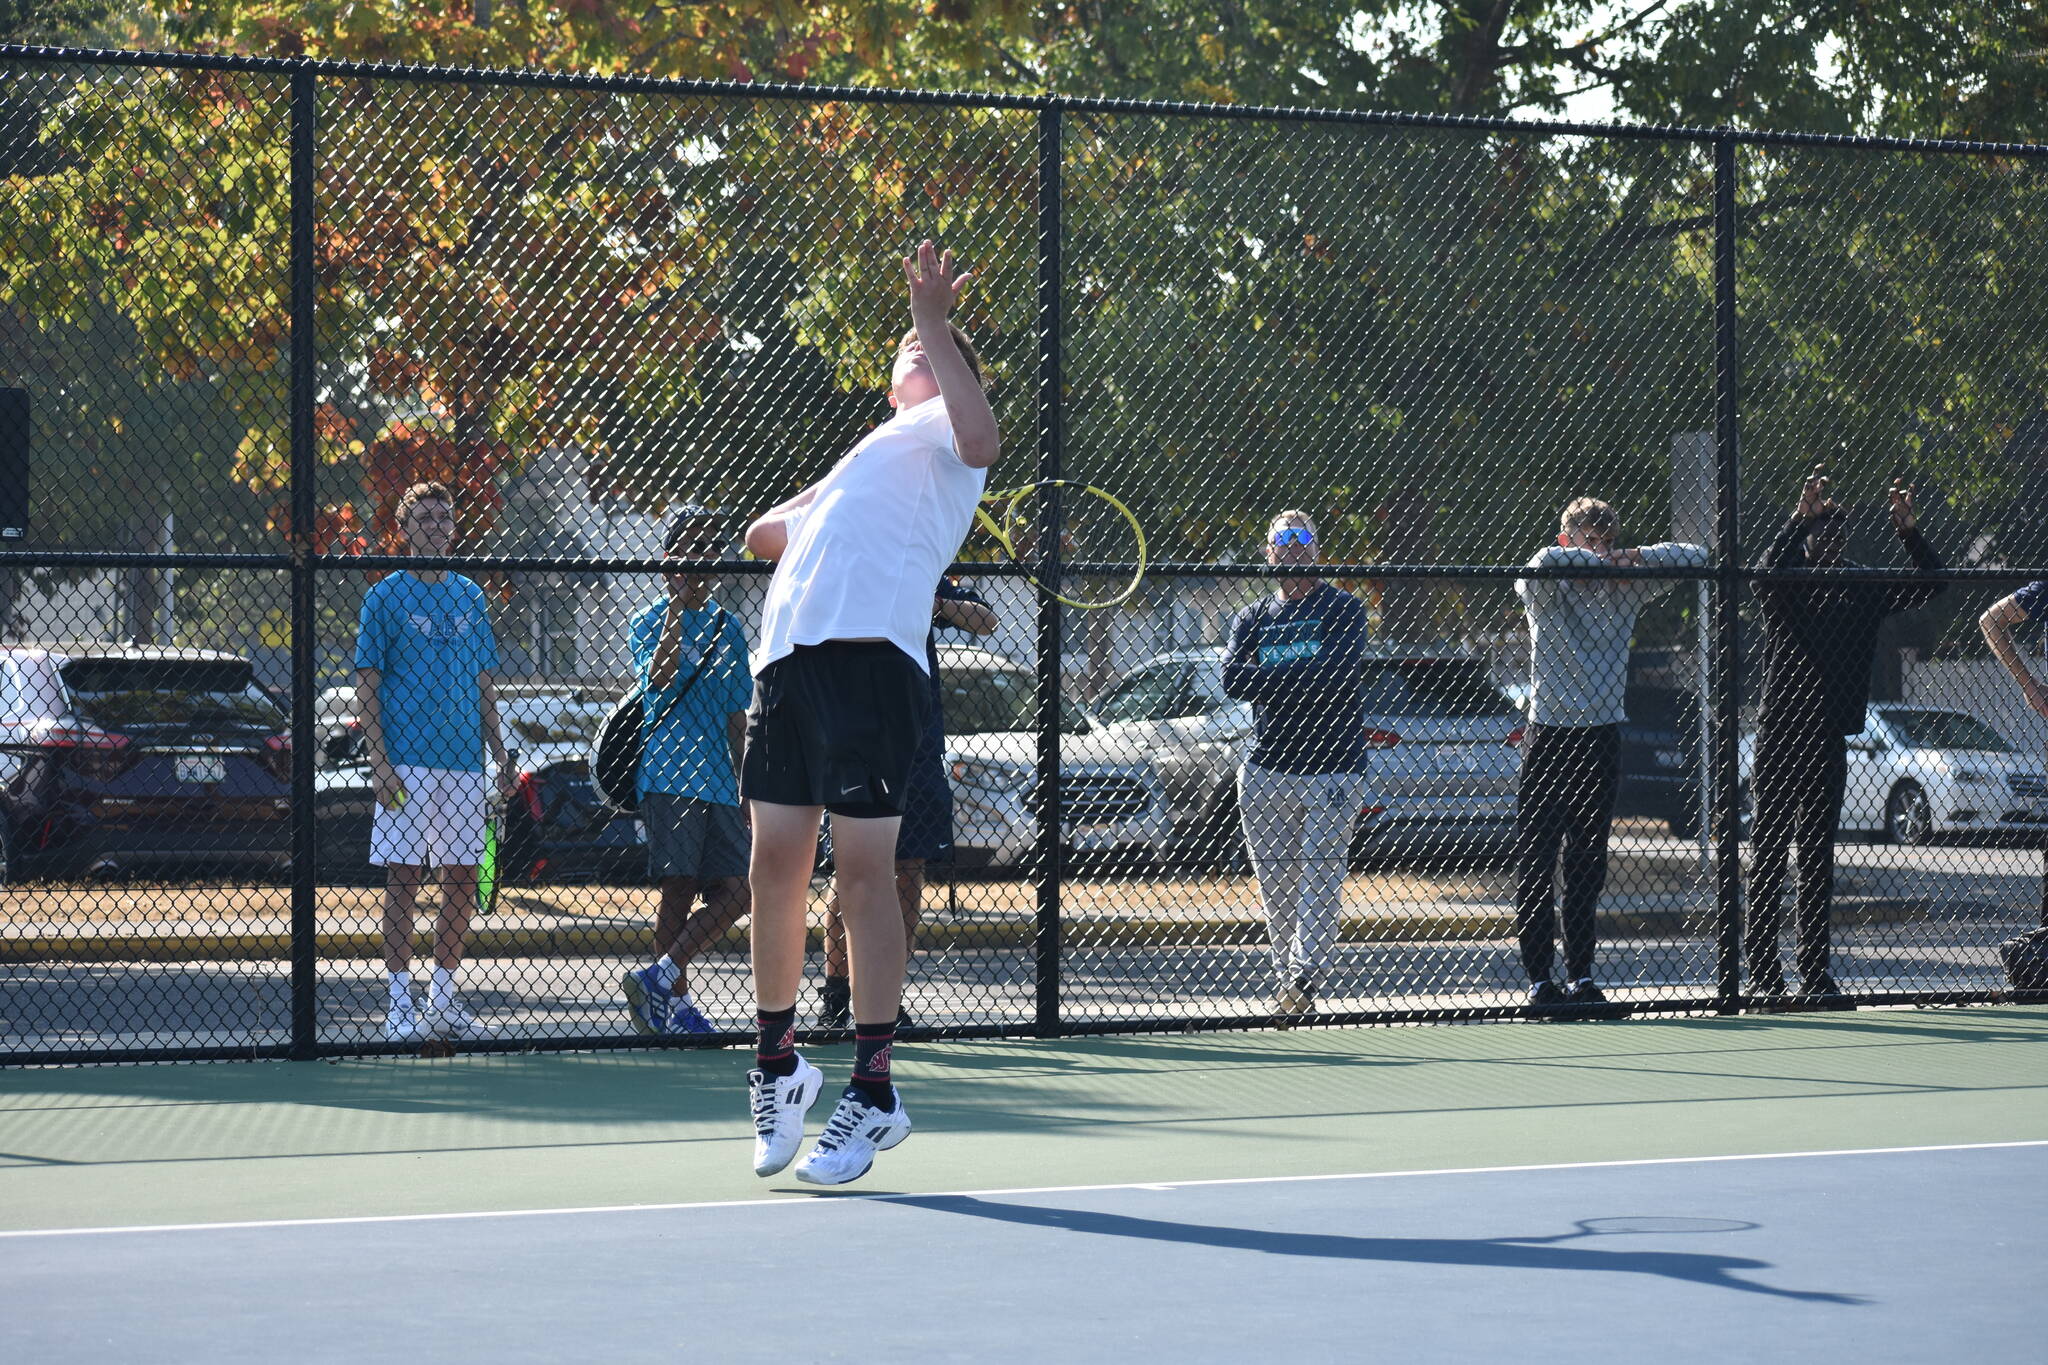 Top seed Cole Fredericks of Kentlake serving in his first match Oct. 14. Photo by Ben Ray/Sound Publishing